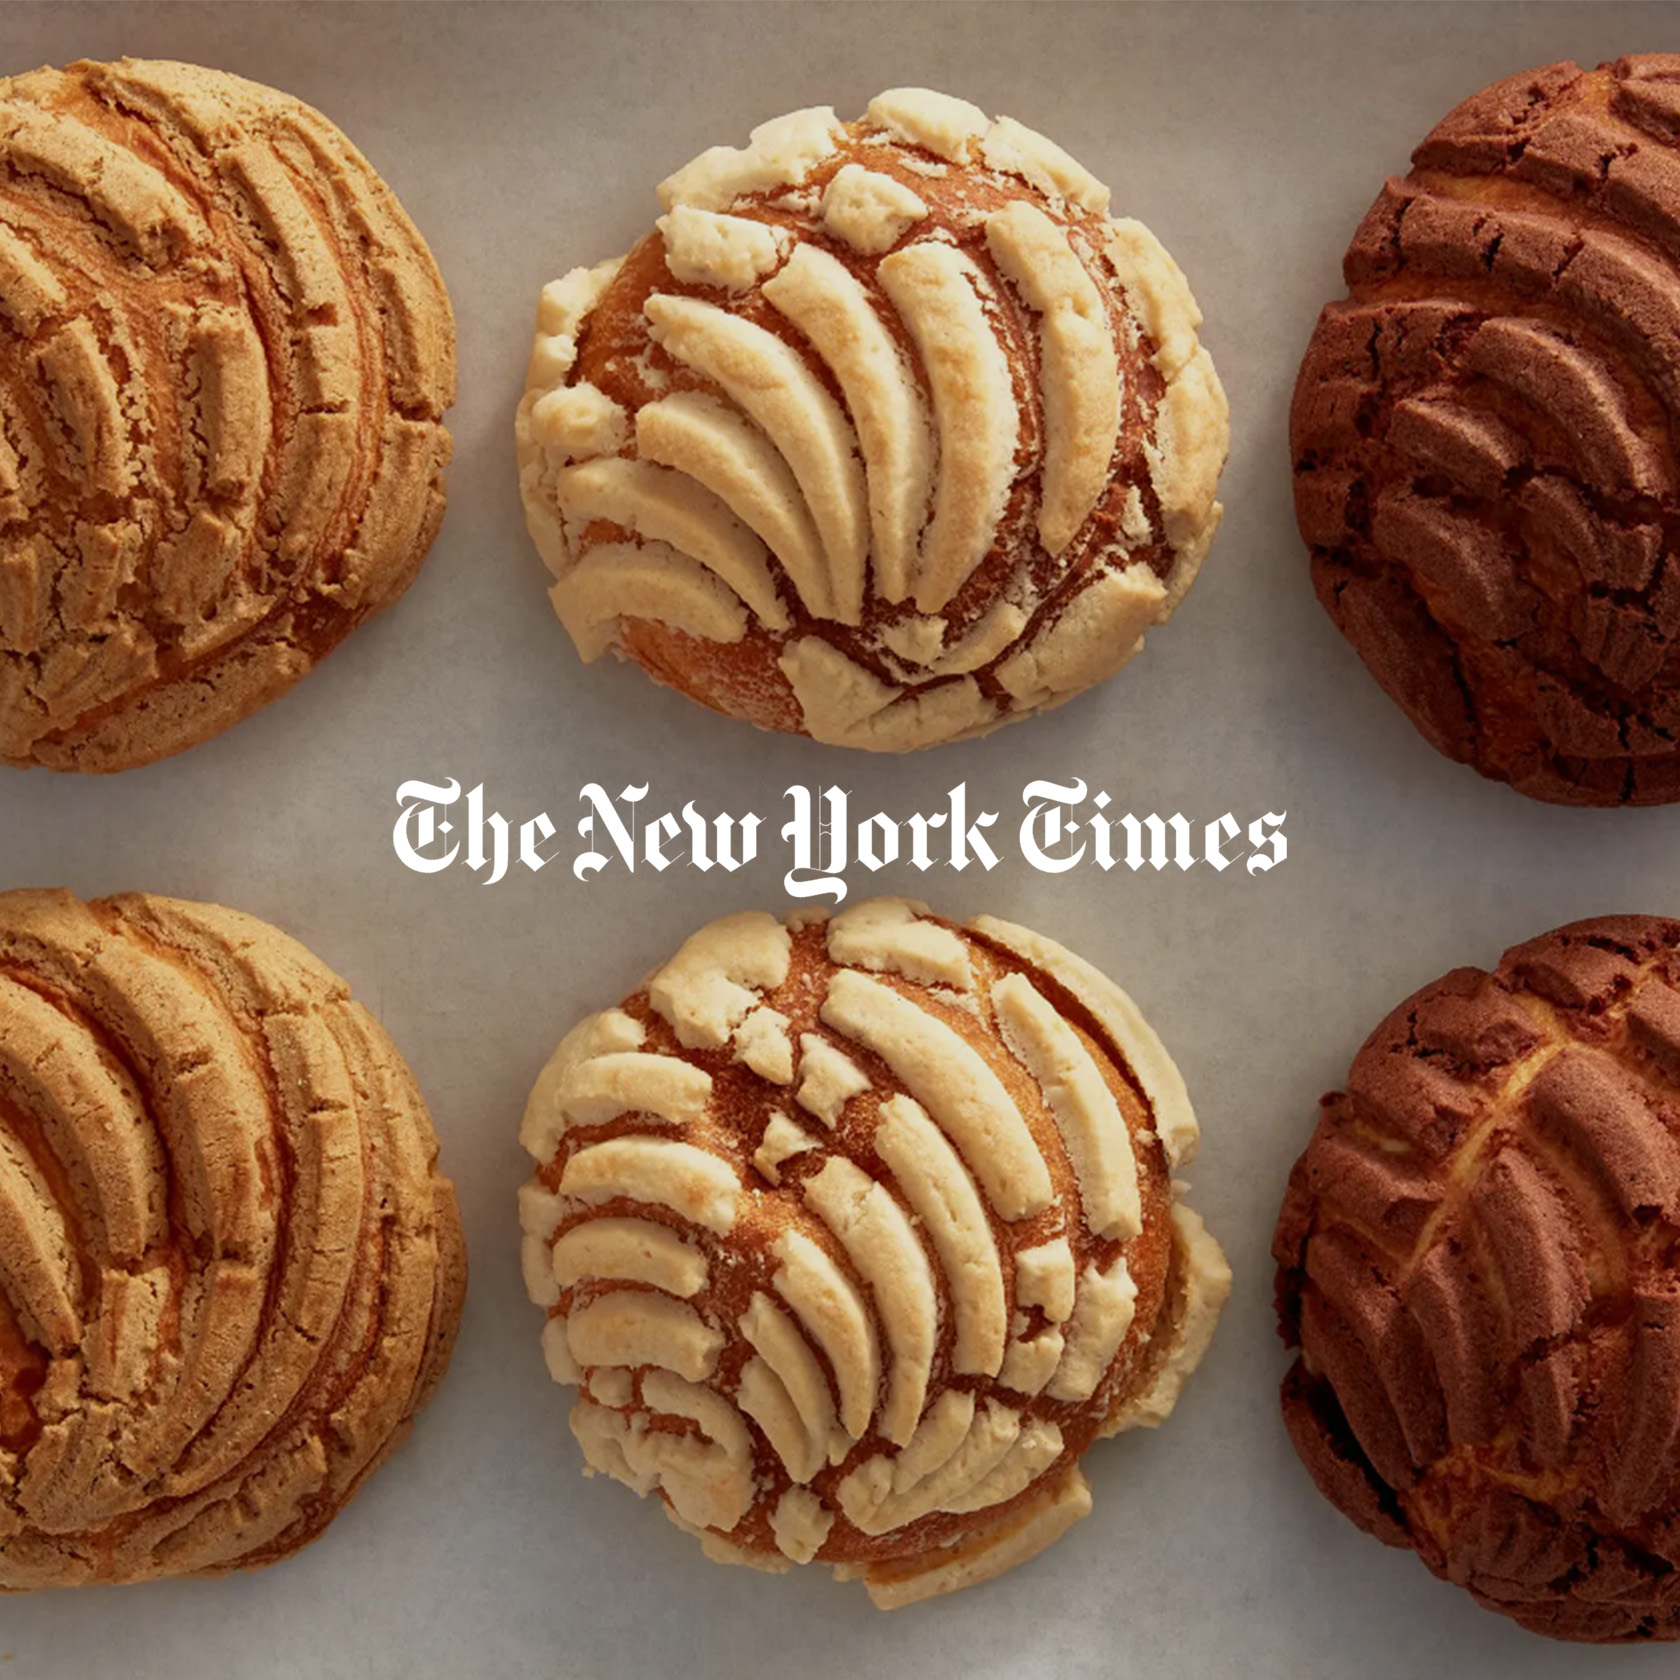 New York Times "There’s Nothing Like a Good Concha. Here’s How to Make Them Great."